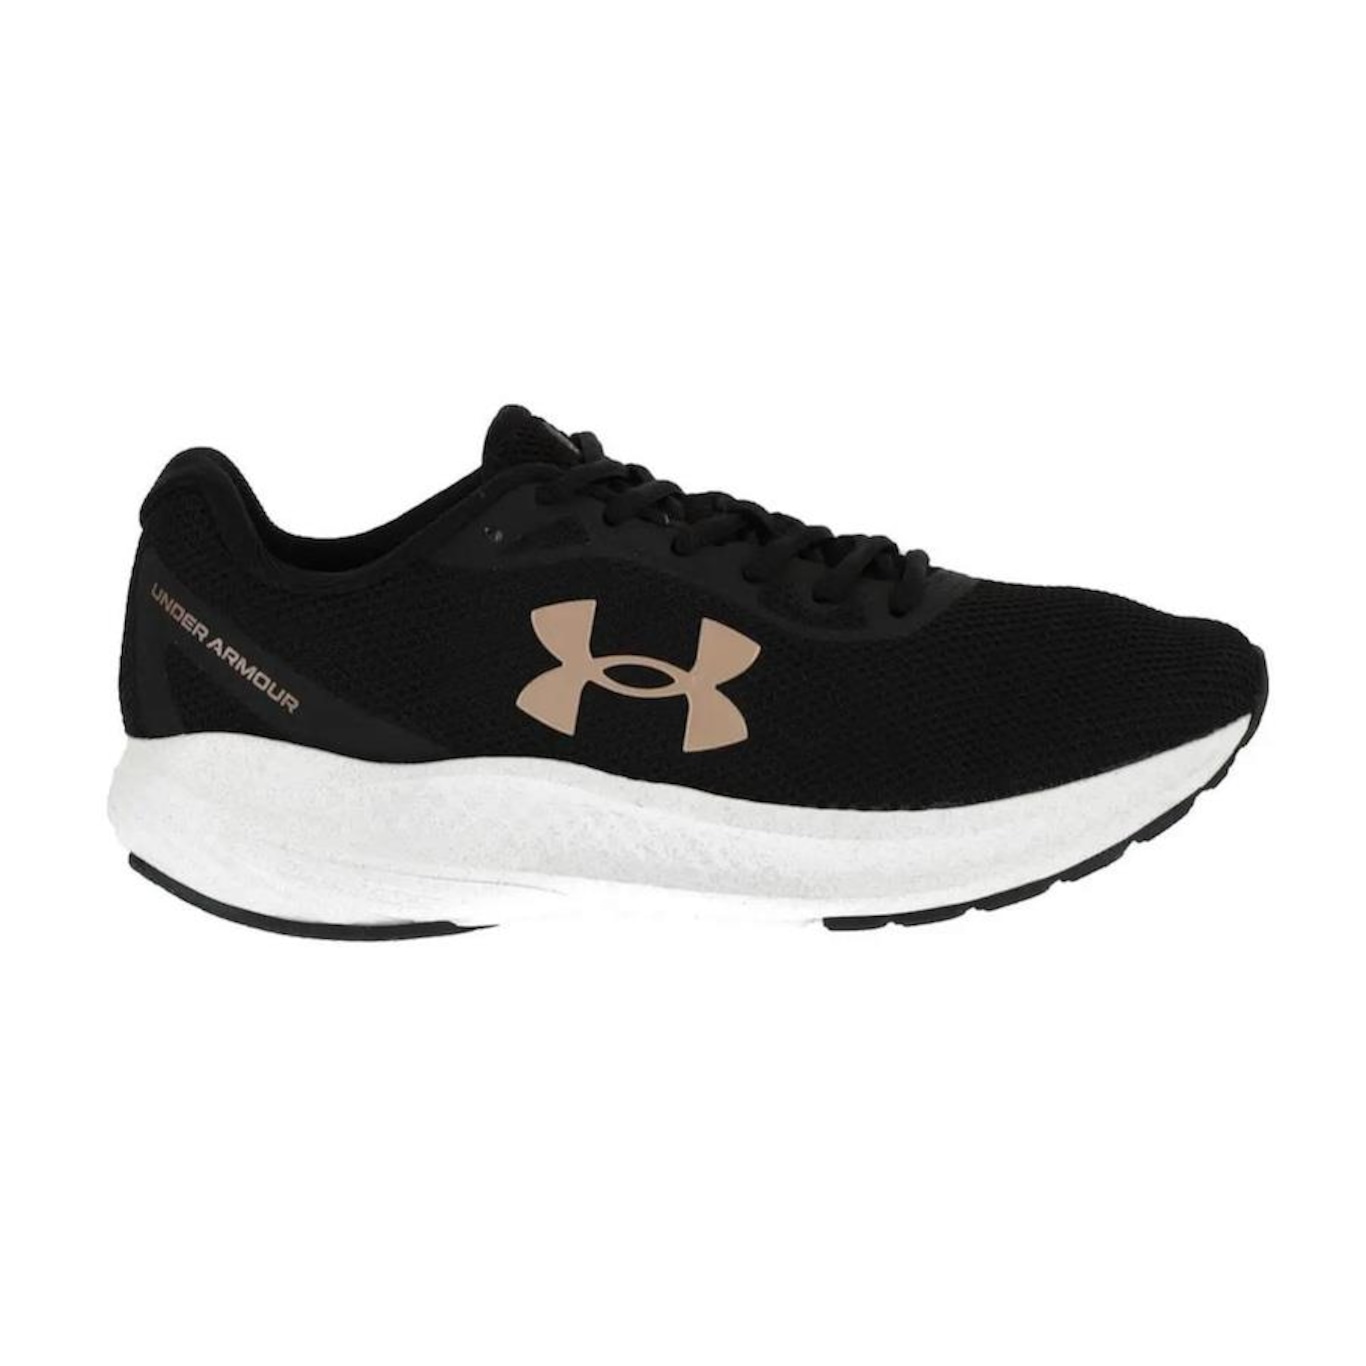 Tenis Under Armour Running Charged para Mujer